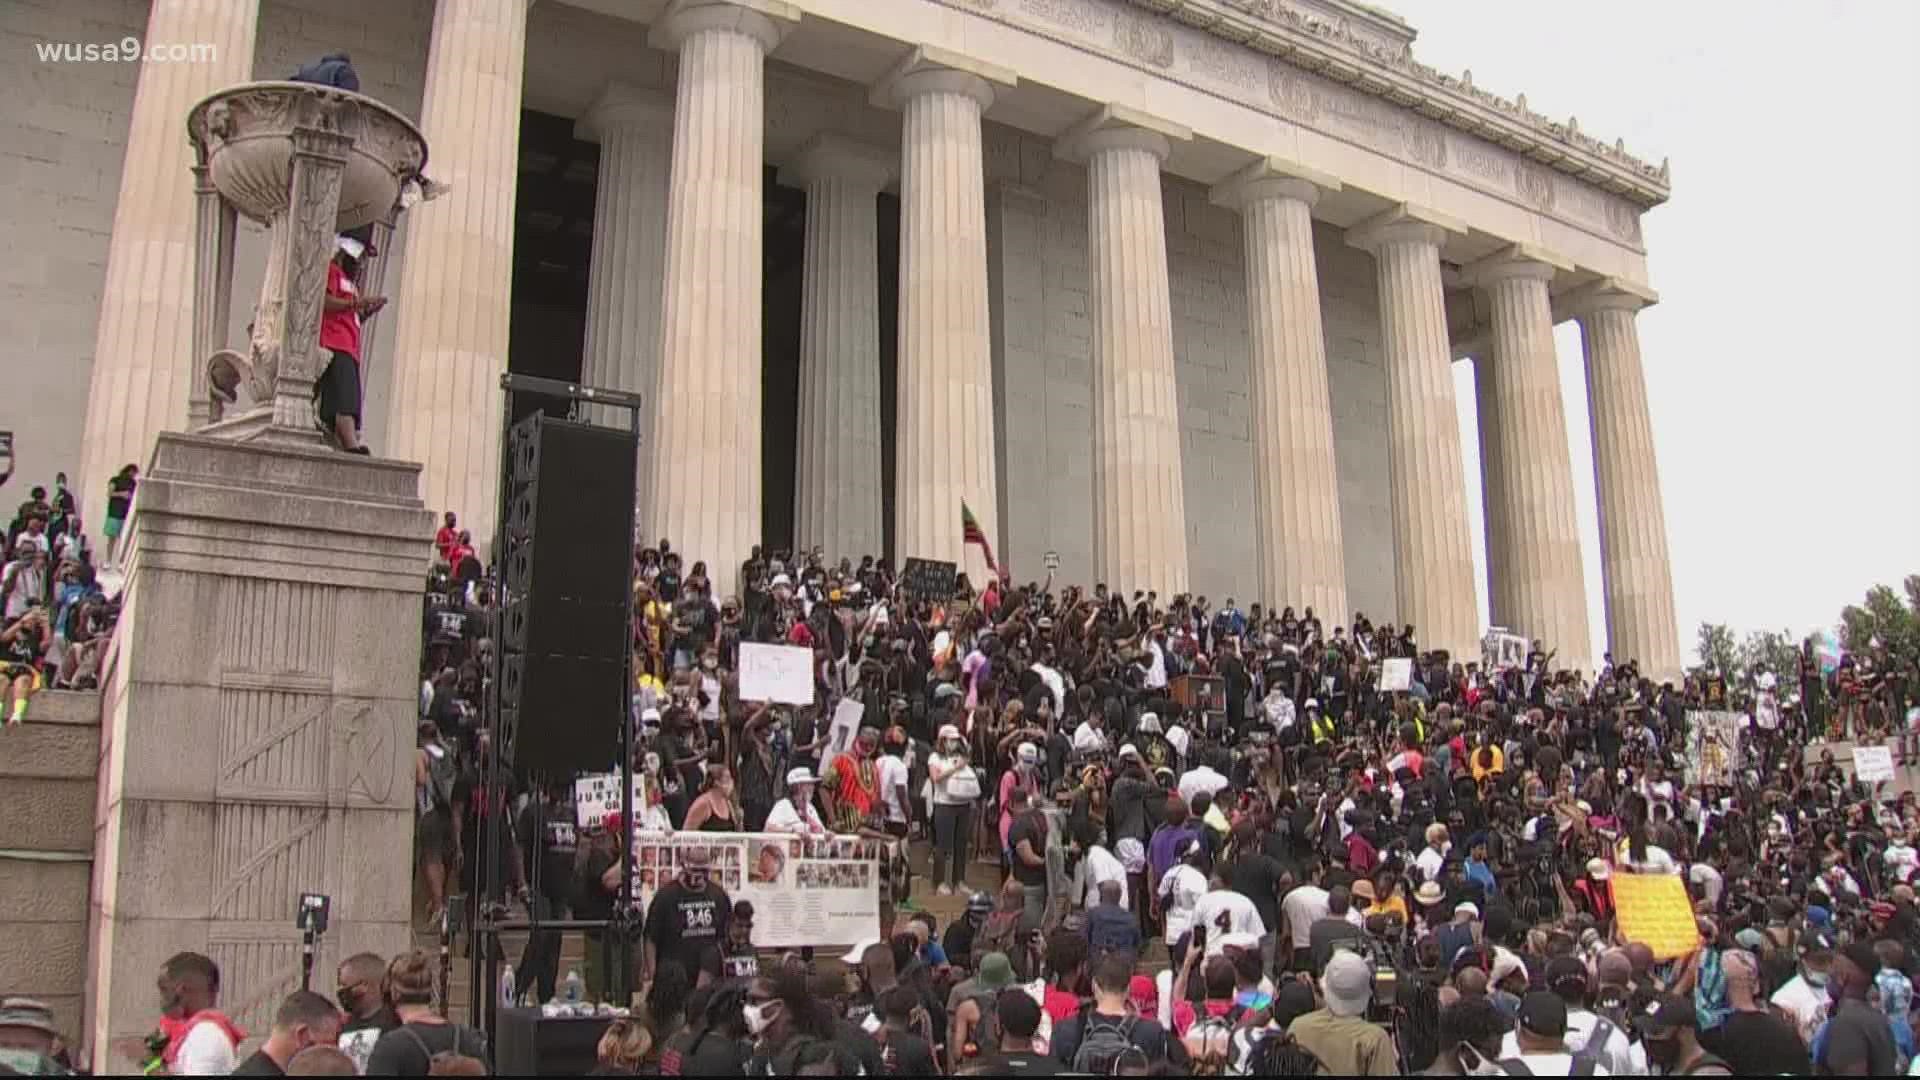 Several events are expected to take place on the National Mall to coincide with the 58th anniversary of the March on Washington.